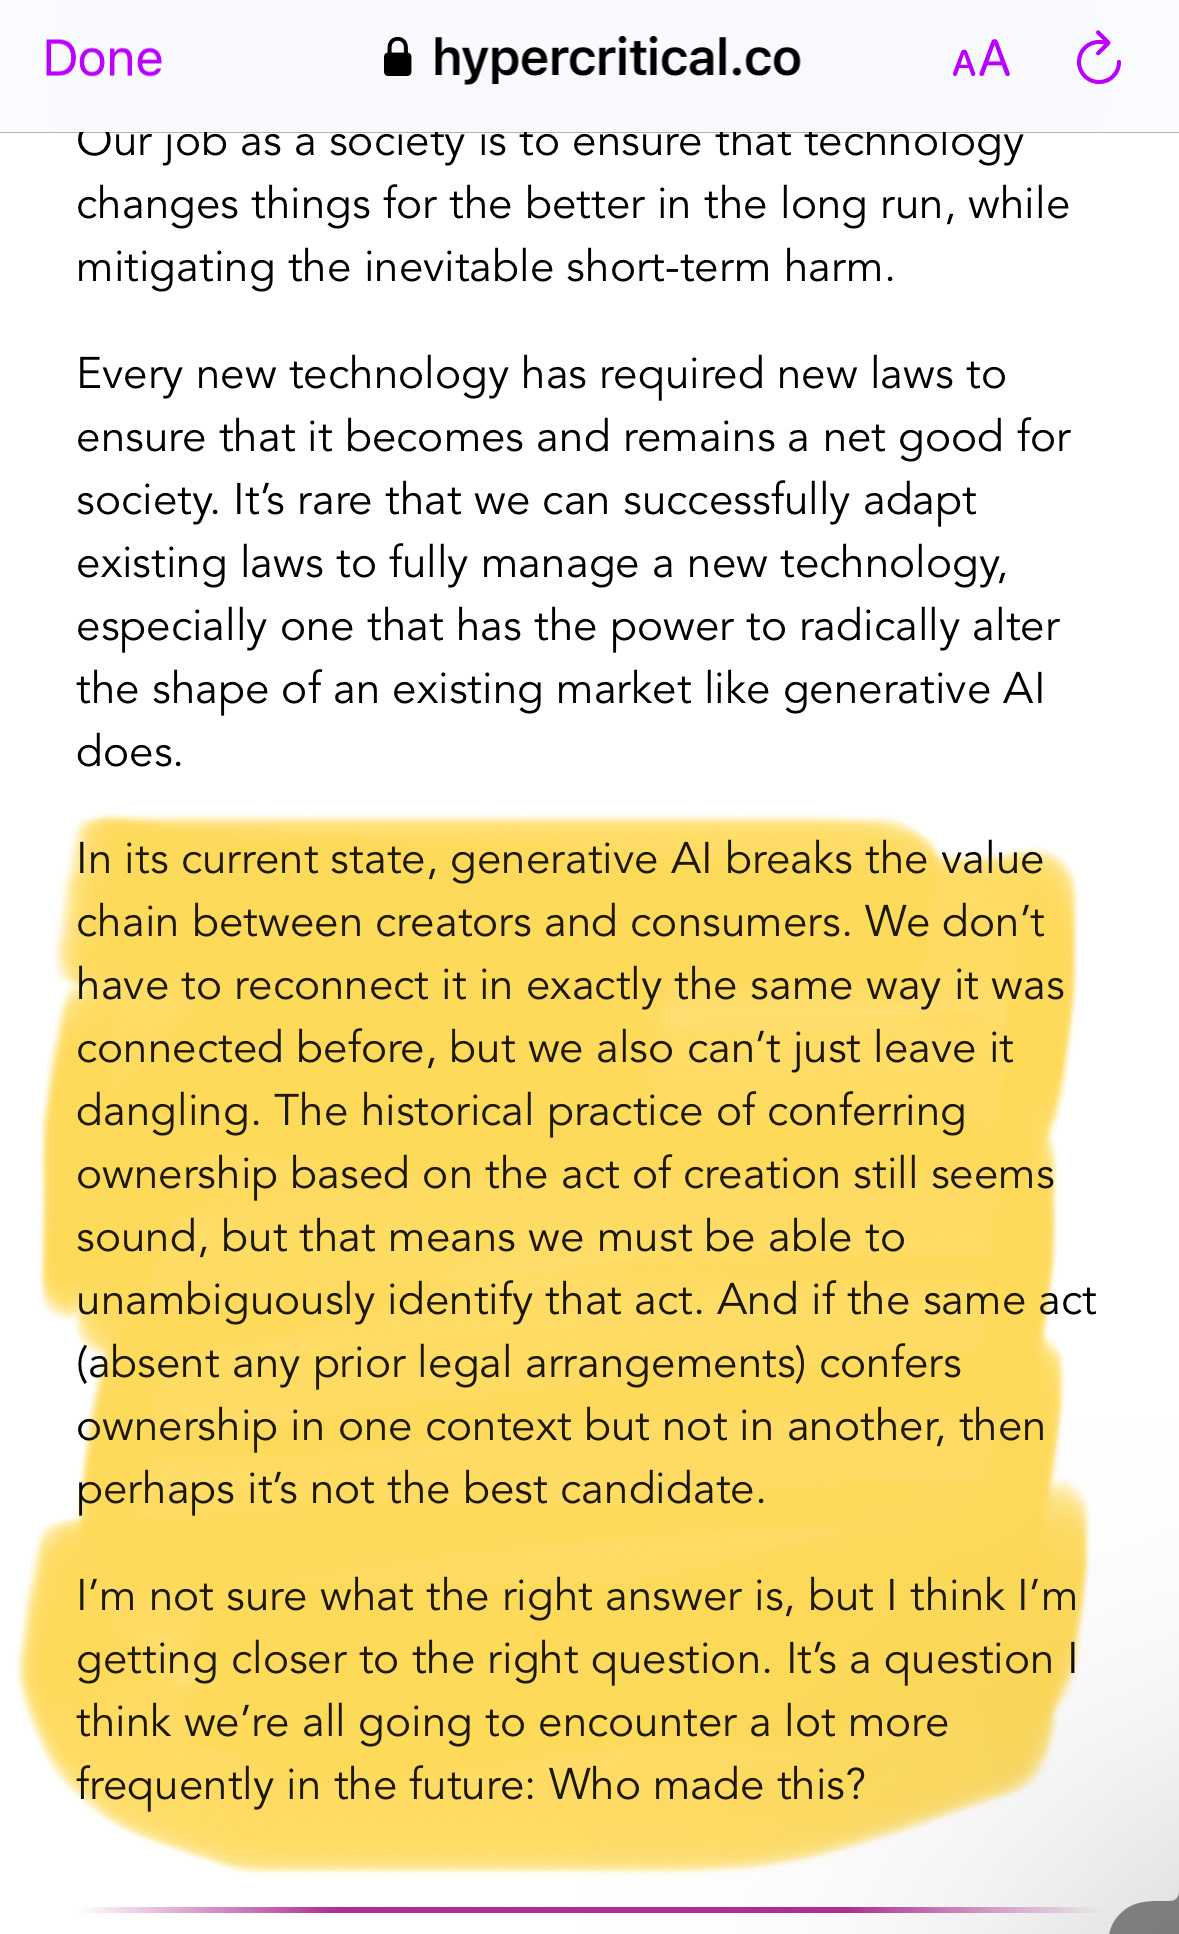 Text from linked article: “In its current state, generative Al breaks the value chain between creators and consumers. We don't have to reconnect it in exactly the same way it was connected before, but we also can't just leave it dangling. The historical practice of conferring ownership based on the act of creation still seems sound, but that means we must be able to unambiguously identify that act. And if the same act (absent any prior legal arrangements) conters ownership in one context but not in another, then perhaps it's not the best candidate.&10;I'm not sure what the right answer is, but I think I'm getting closer to the right question. It's a question I think we're all going to encounter a lot more frequently in the future: Who made this?”